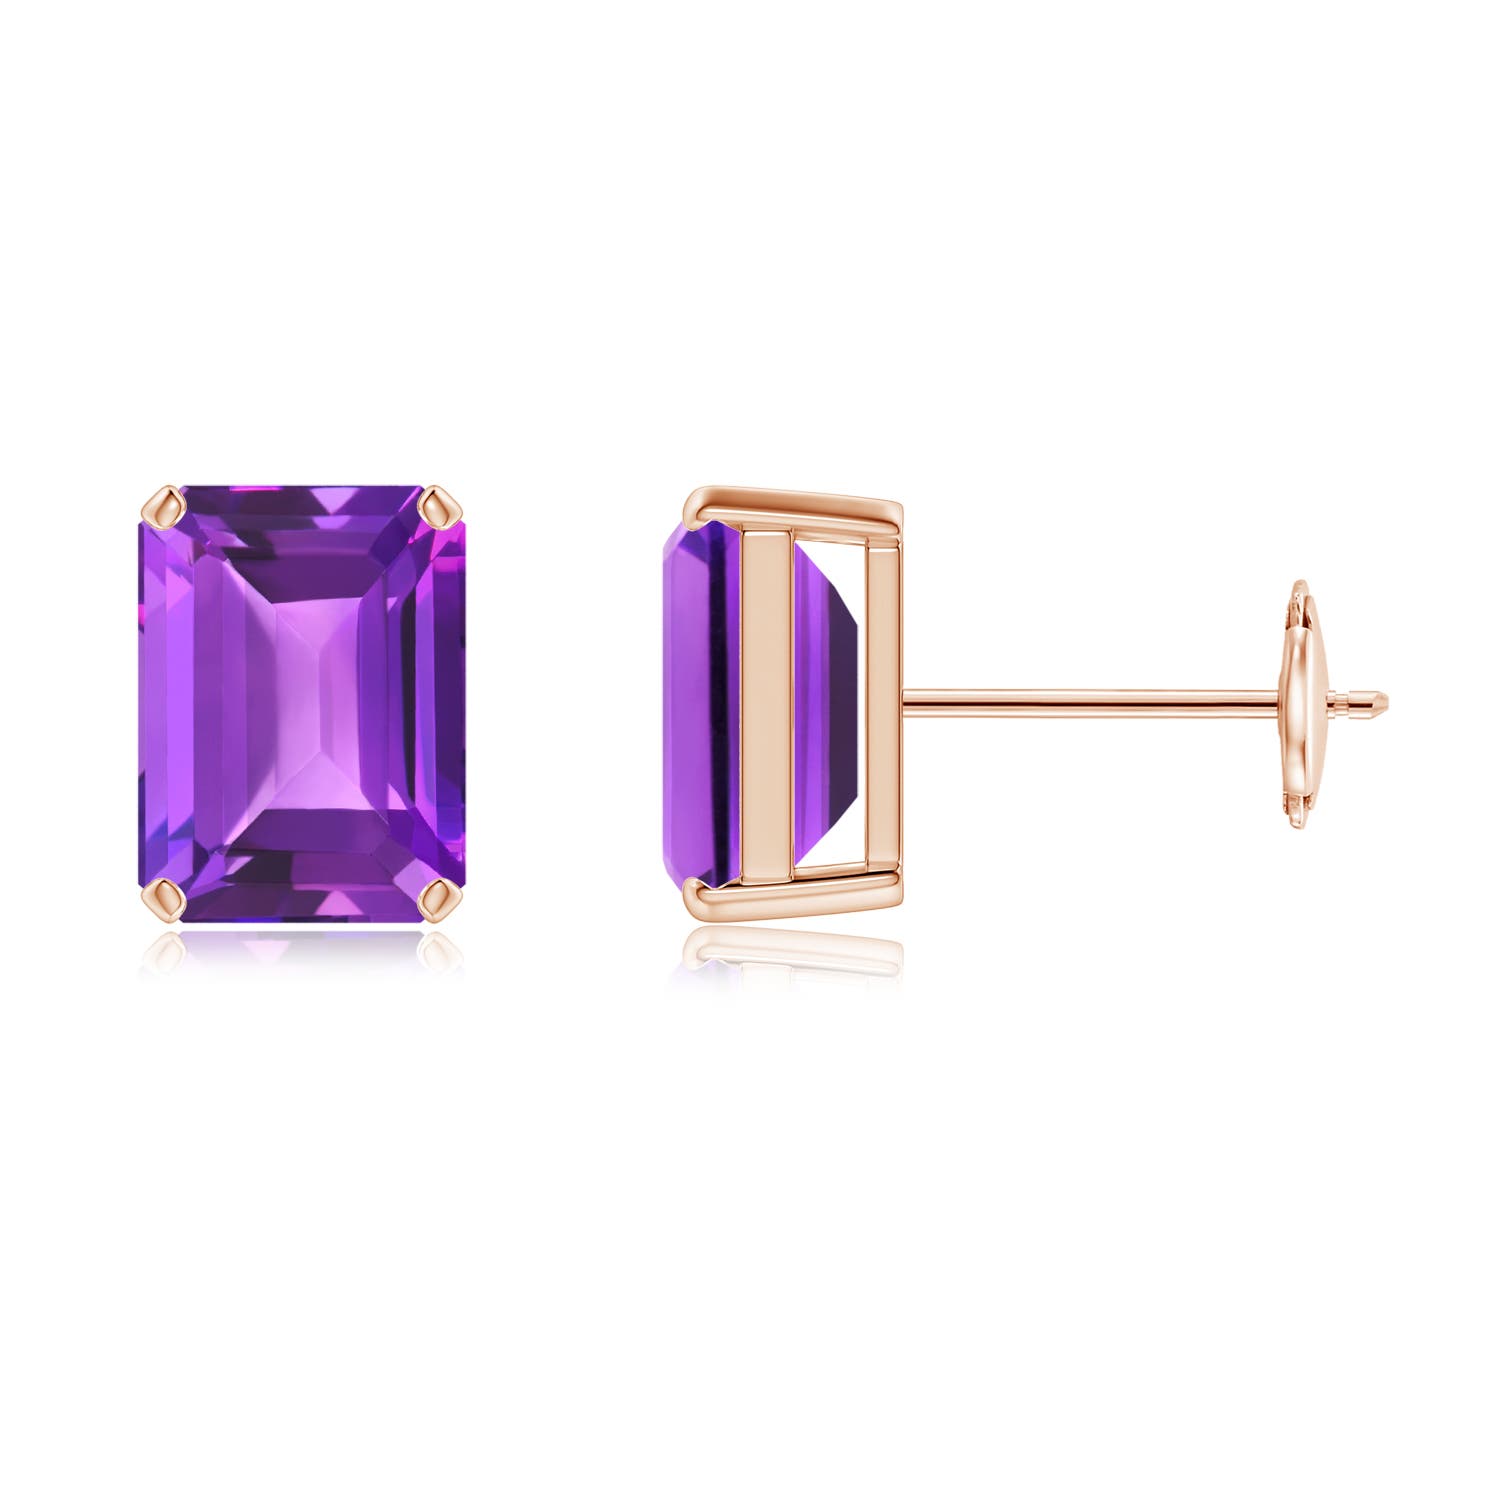 AAA - Amethyst / 3 CT / 14 KT Rose Gold